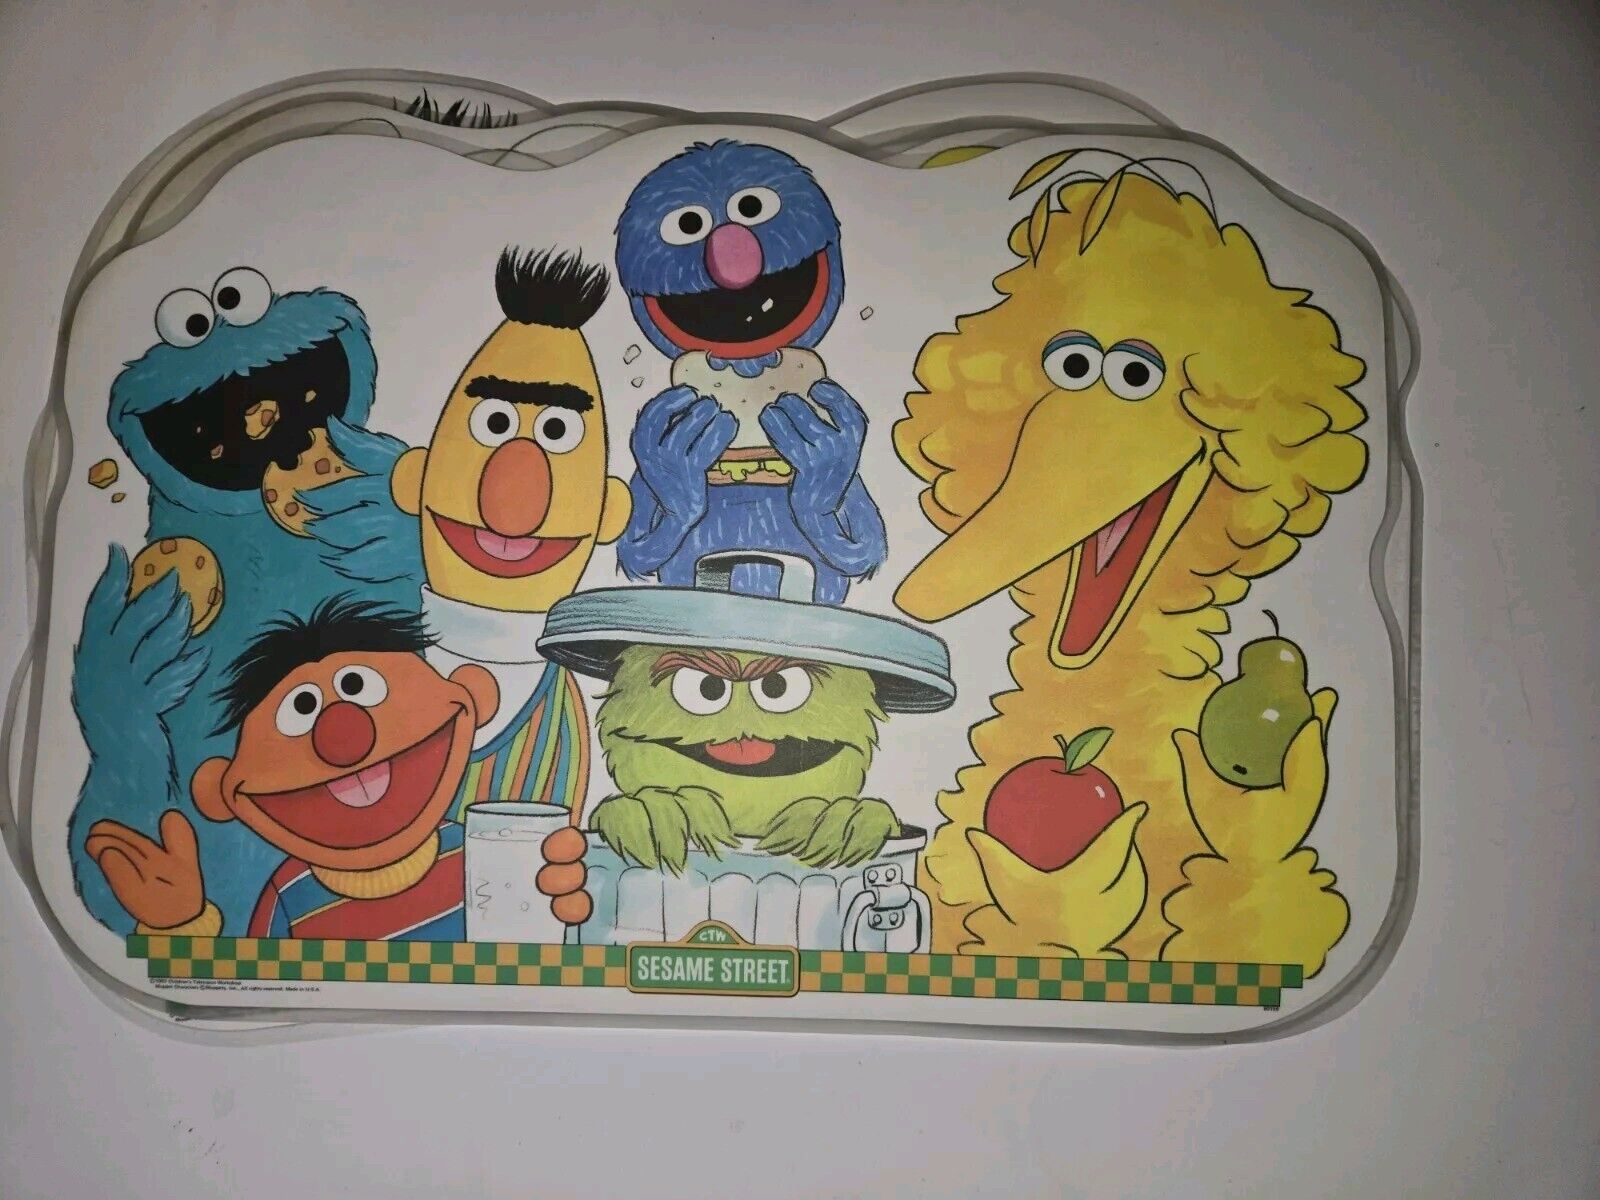  4 Vintage 1982 Sesame Street Double-Sided Activity Placemat 17 1/2\